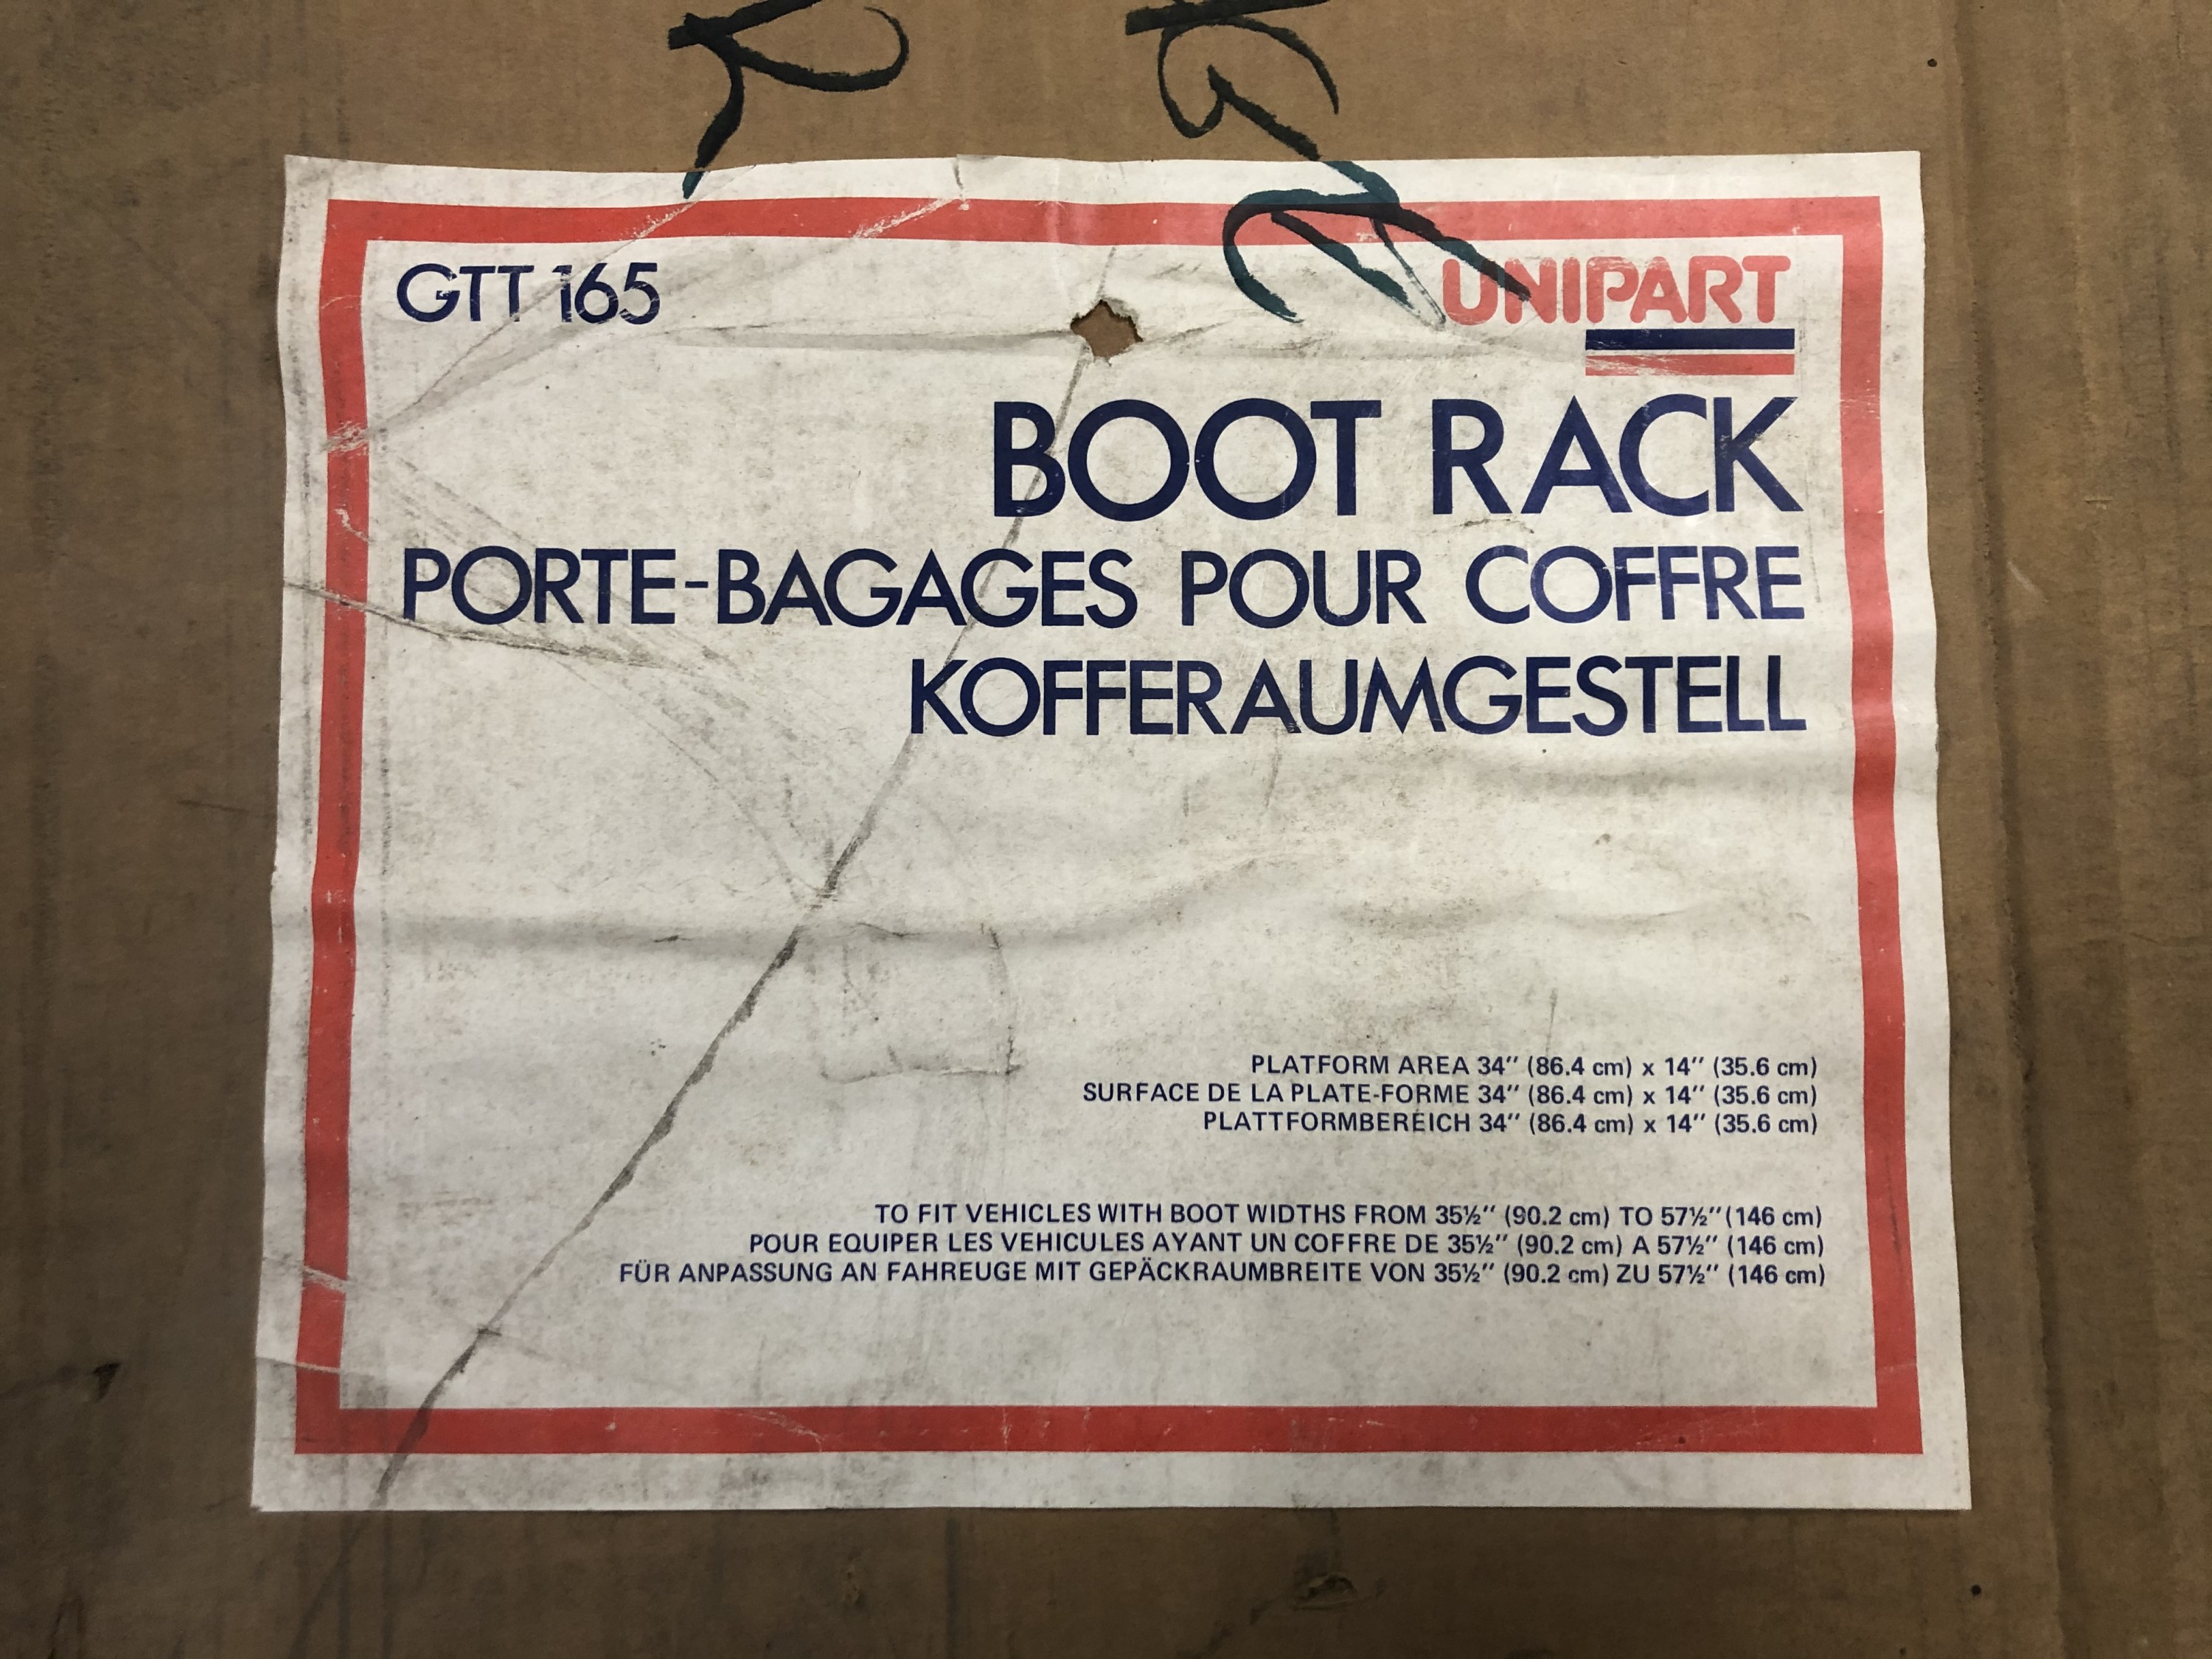 A new old stock boxed sports car Unipart boot rack, GTT165, - Image 4 of 4